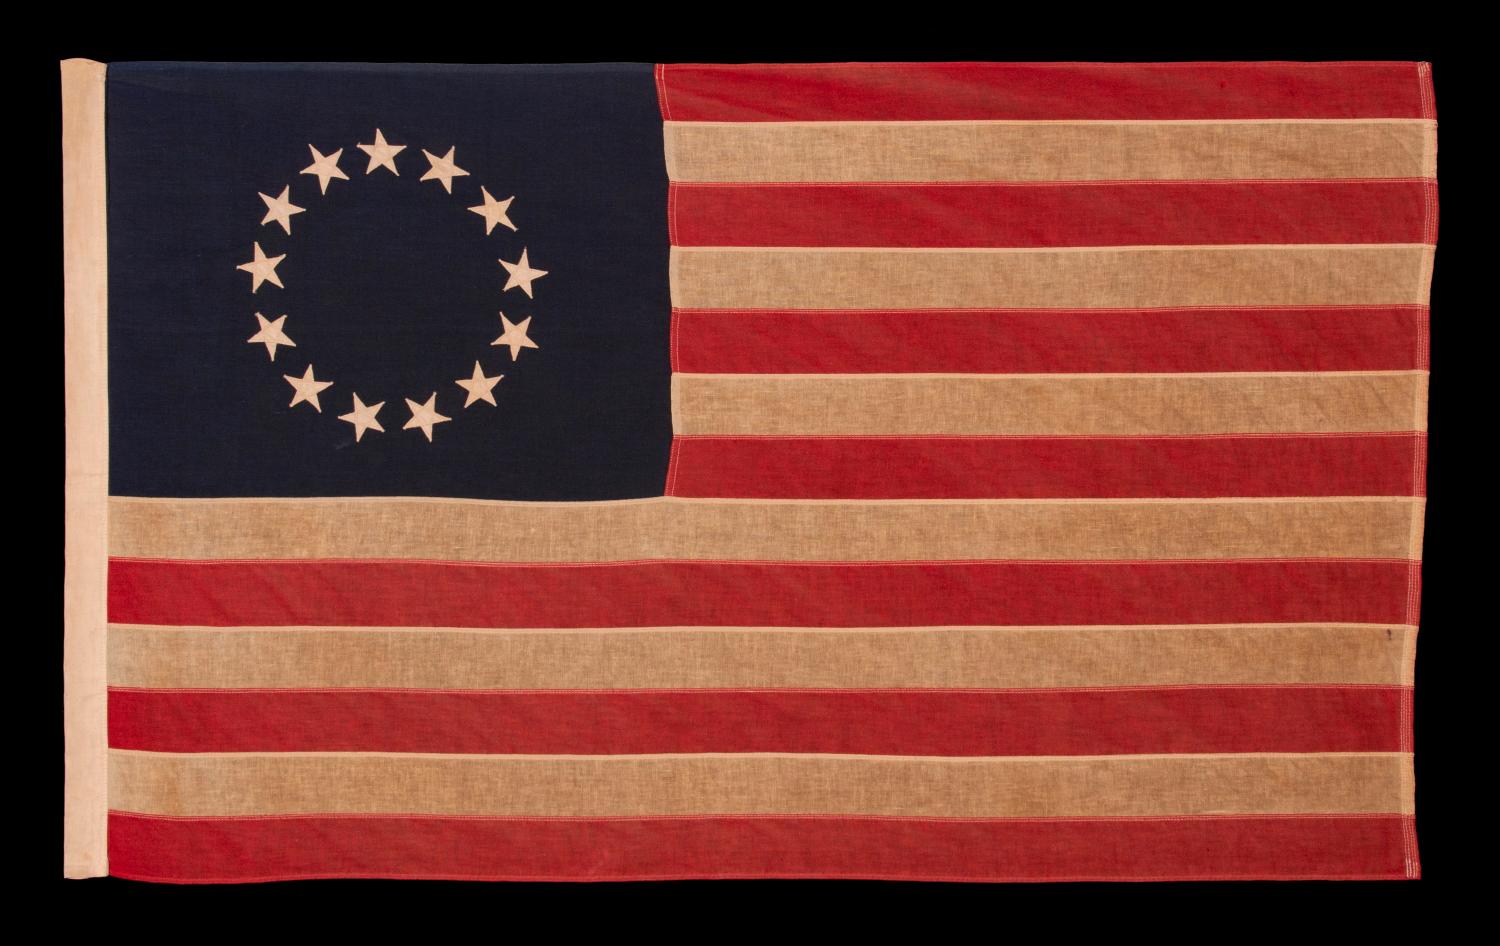 13 STARS IN THE BETSY ROSS PATTERN, A SCARCE SEWN EXAMPLE IN A DESIRABLE SMALL SCALE, 1900-1930 

13 star American national flag, made in the period between approximately 1900 and 1930. The stars are arranged in the circular wreath pattern most